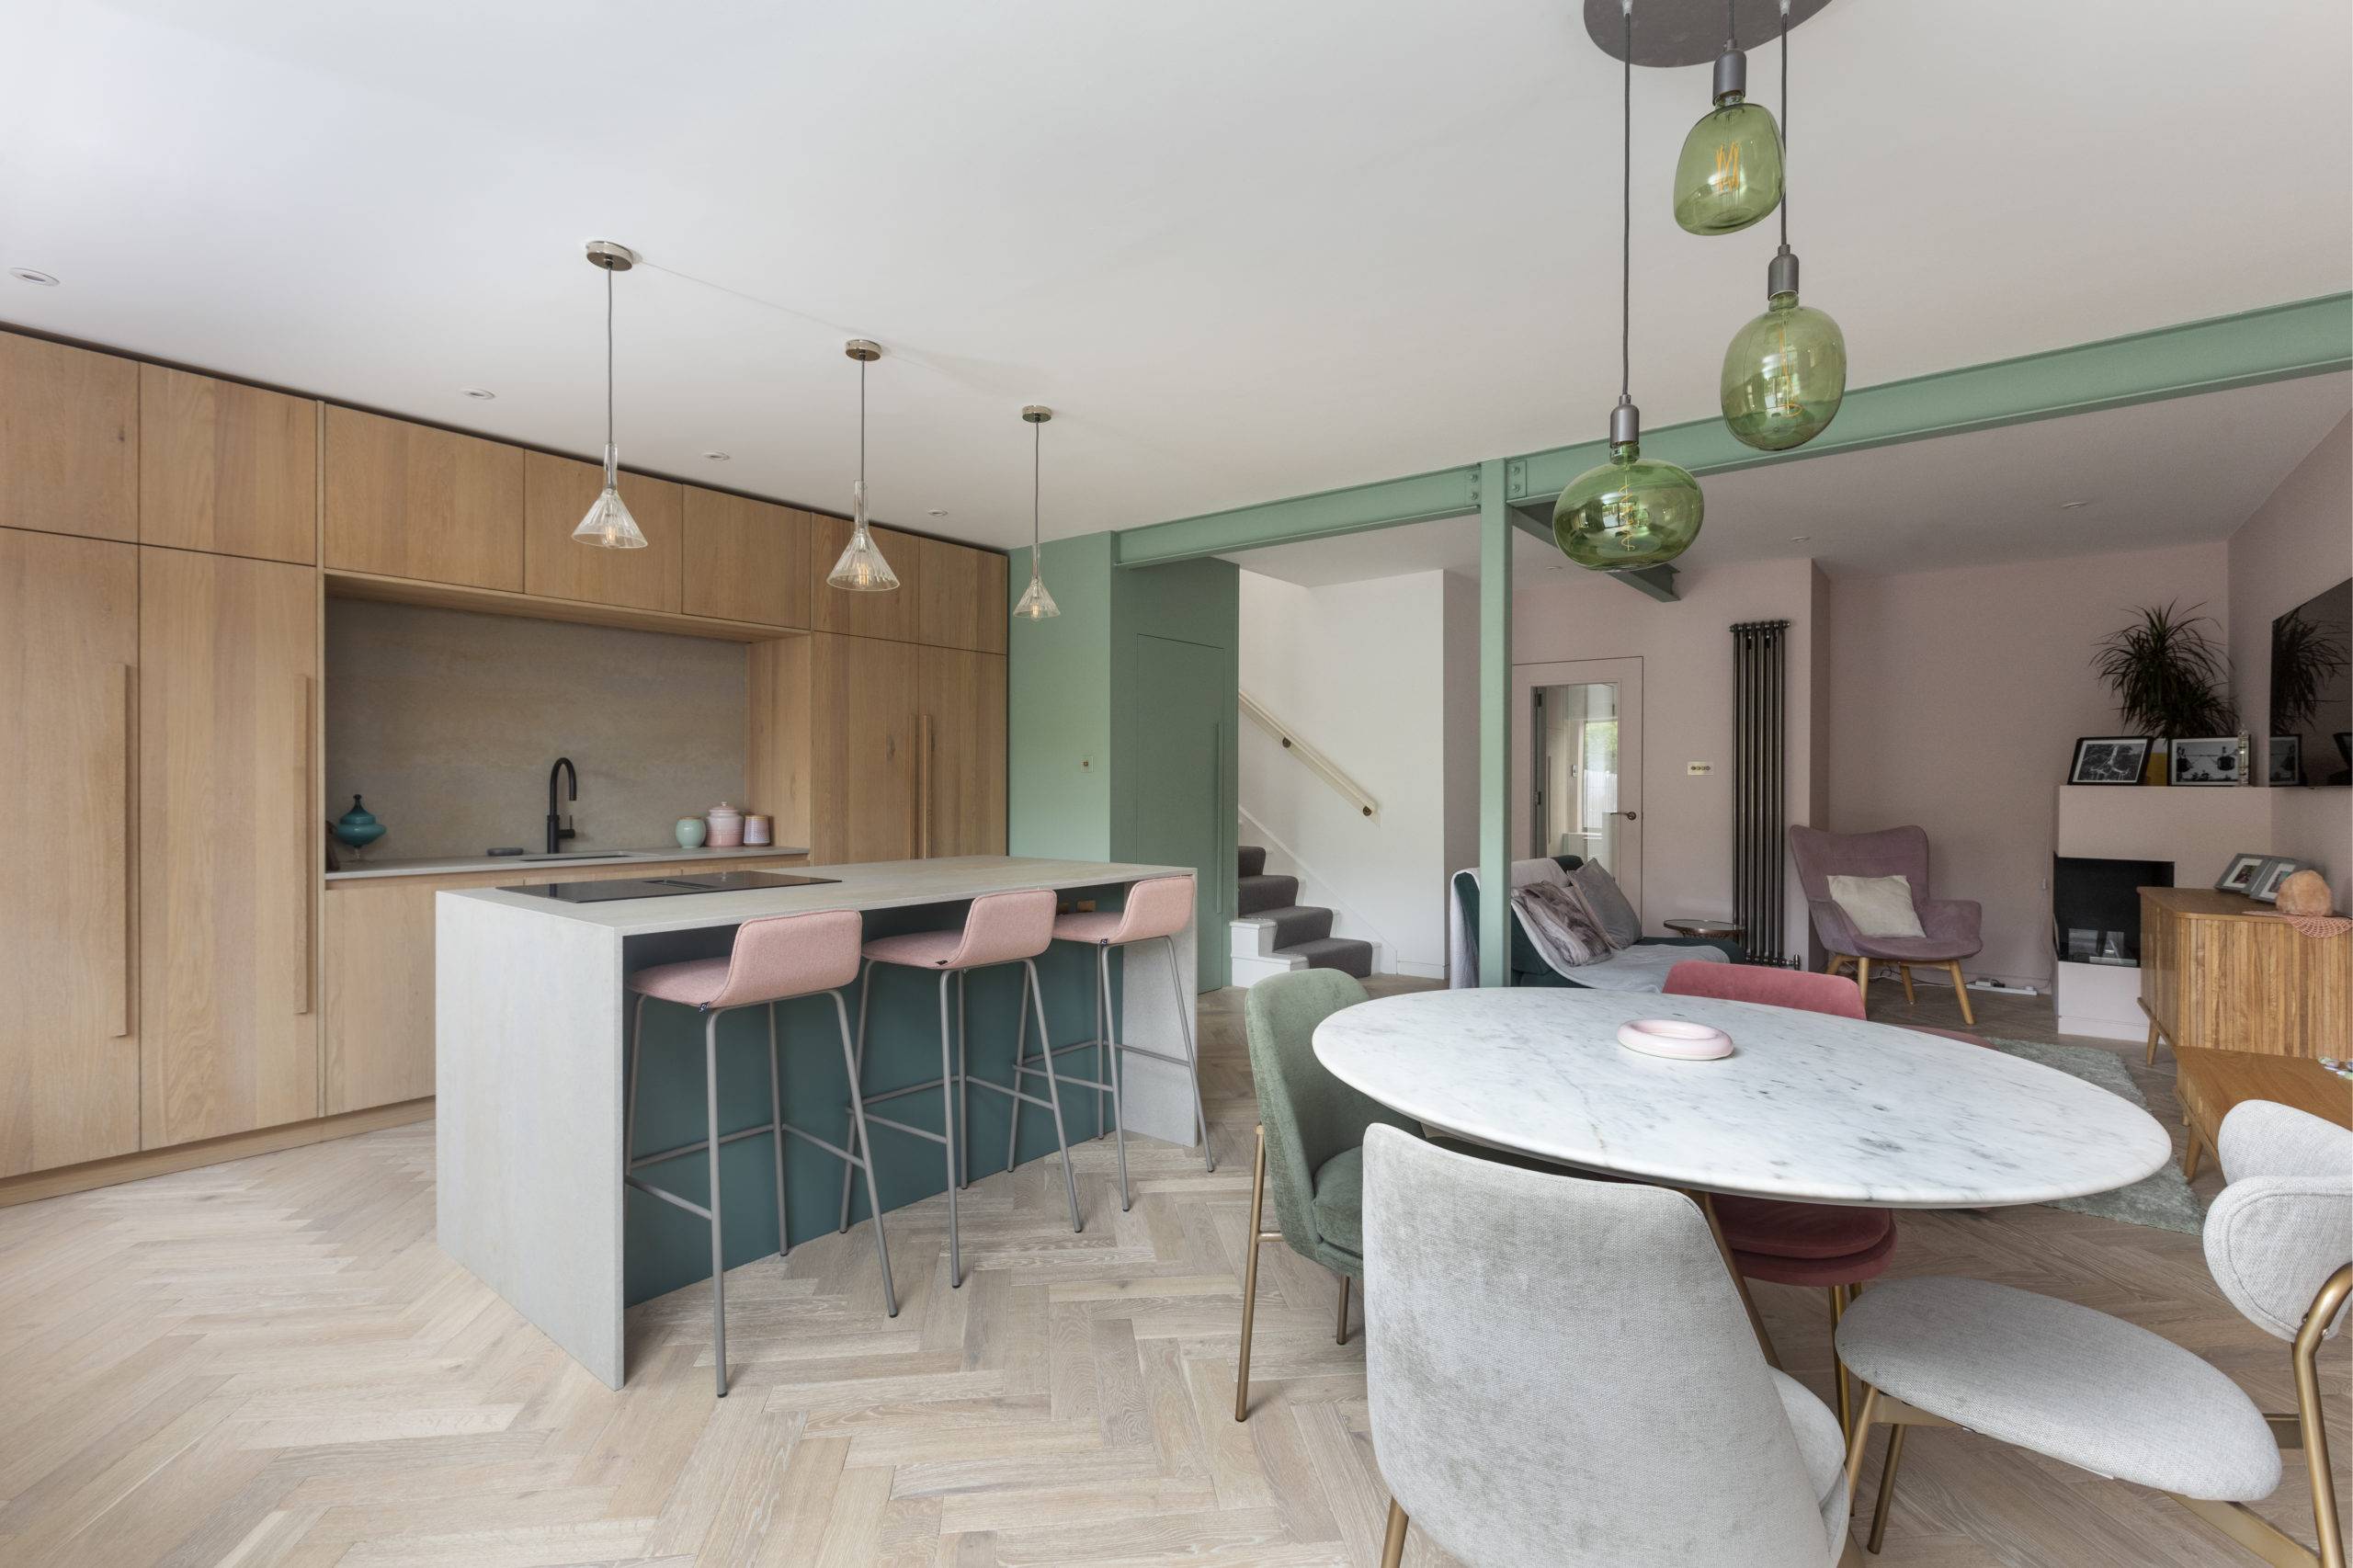 midcentury style open concept kitchen dining room living room with minimal furnishings, oak herringbone floor and pink & green color palette